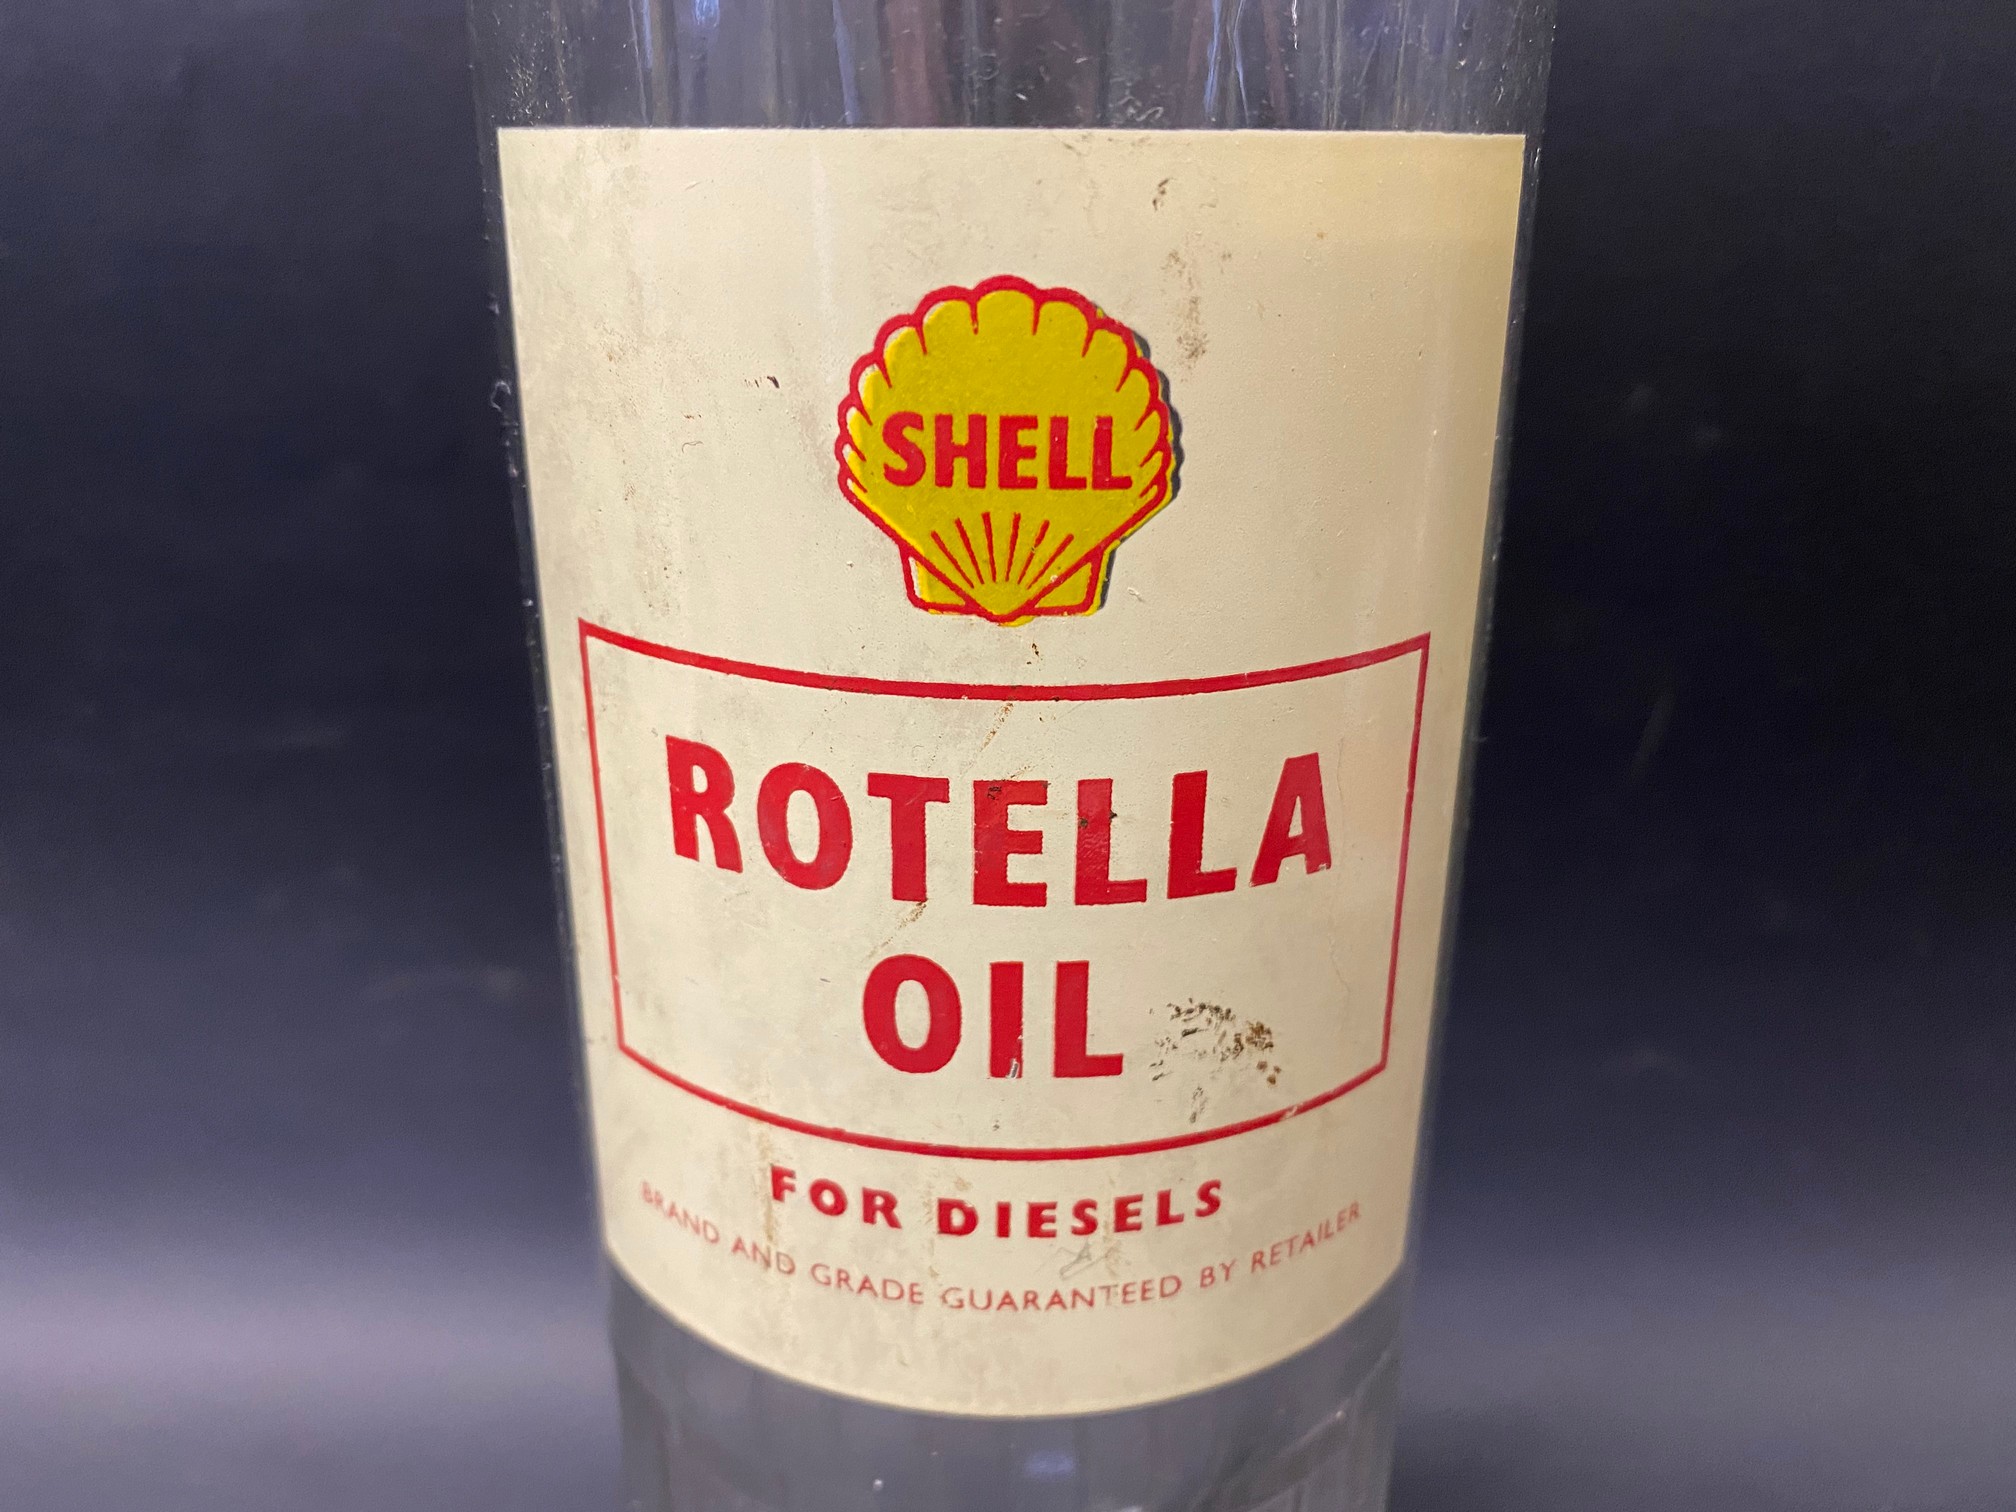 A Shell Rotella Oil quart glass bottle. - Image 2 of 2